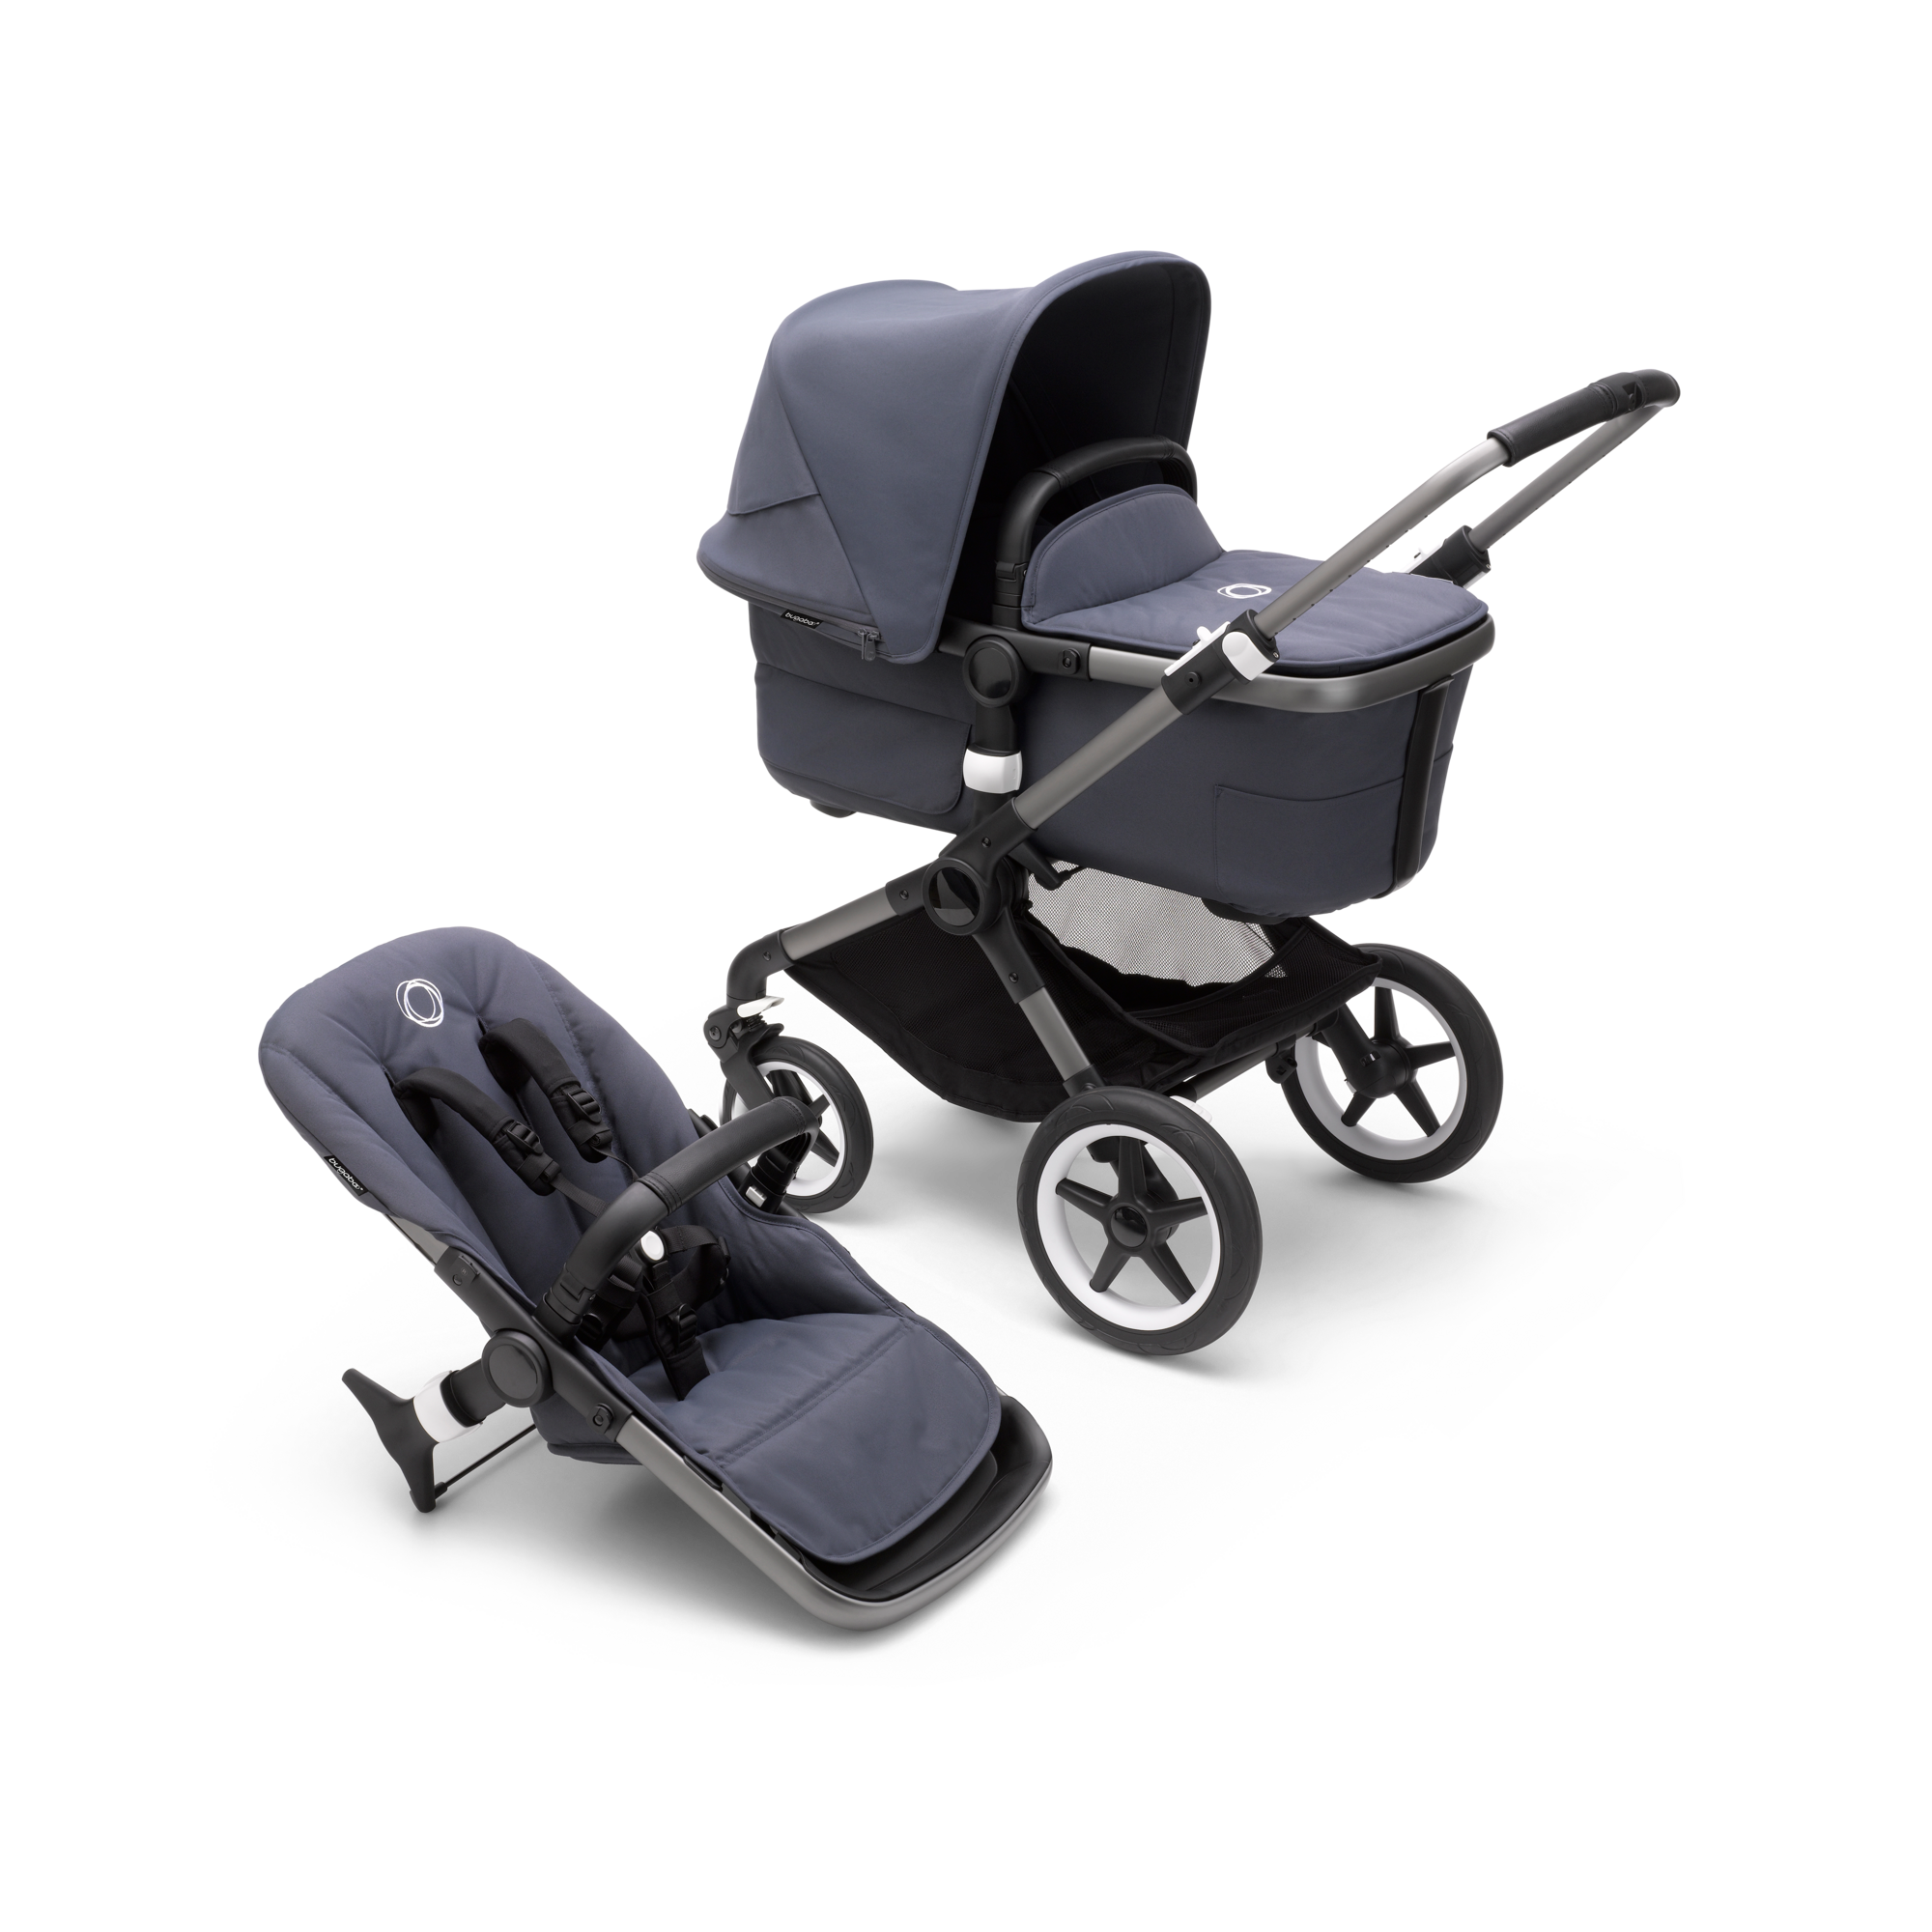 Bugaboo Fox 3 bassinet and seat Stormy canopy, stormy blue fabrics, graphite chassis Bugaboo